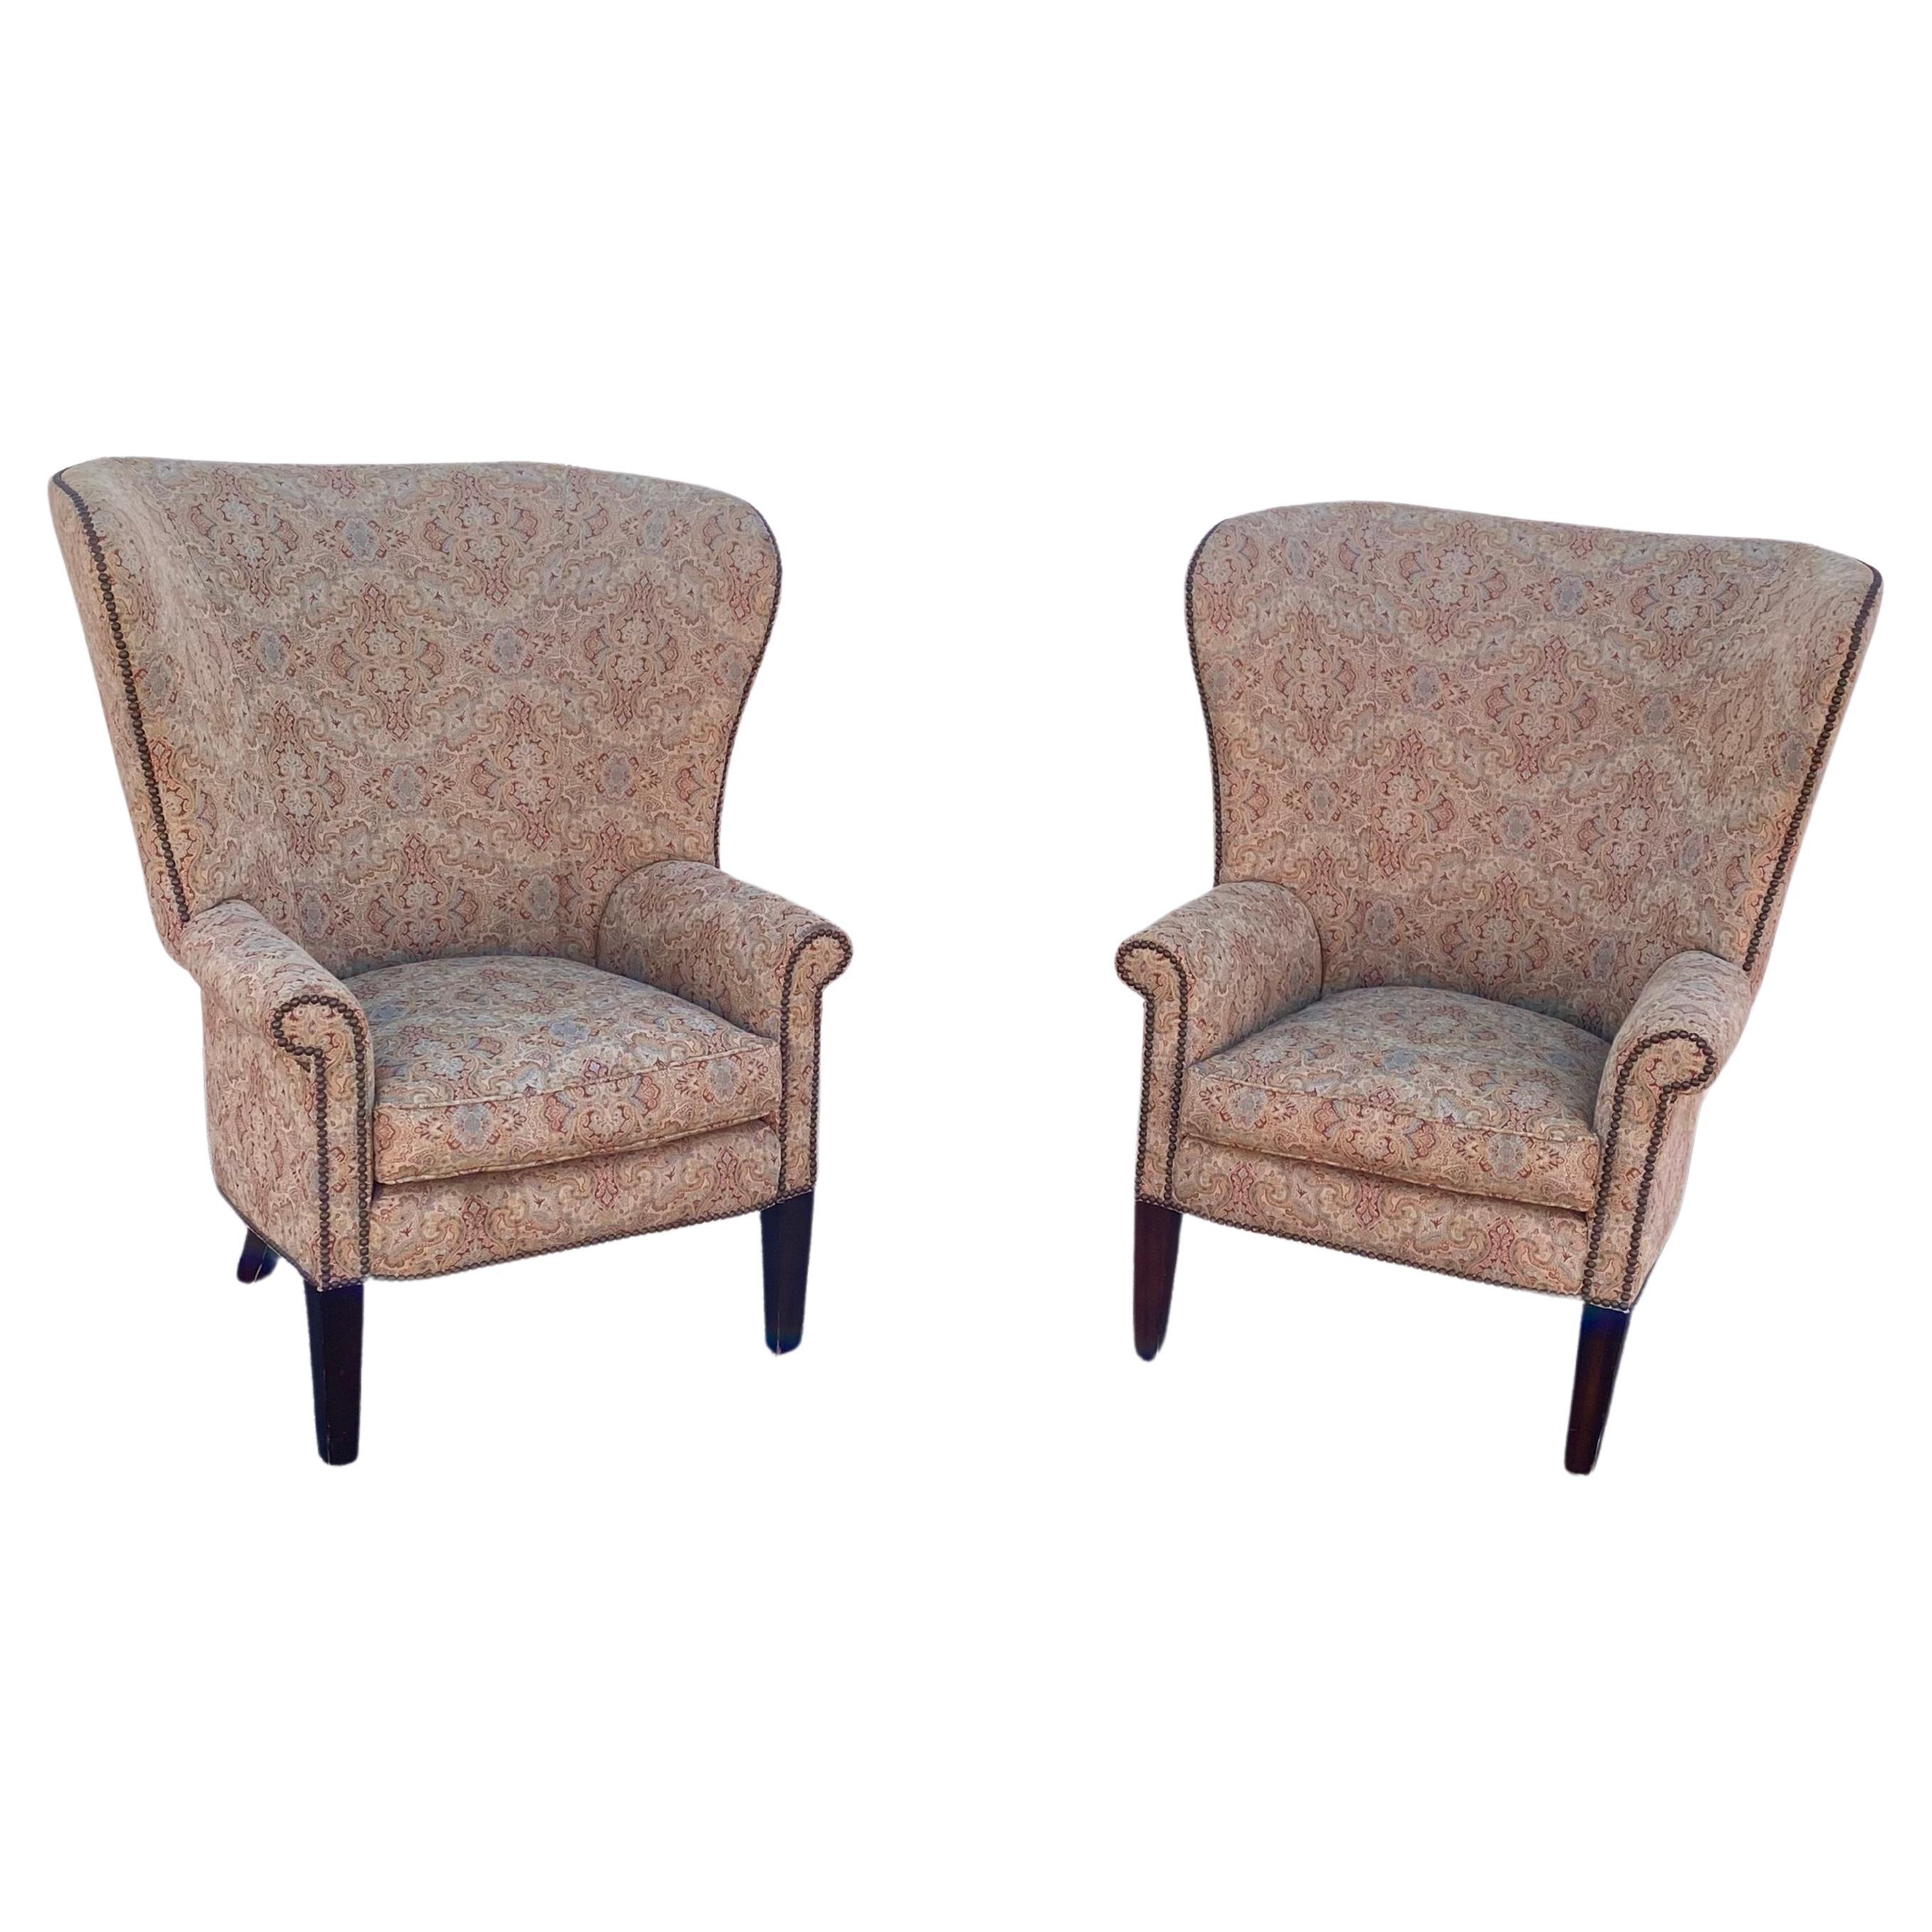 1990s XL Ralph Lauren Henredon Sculptural Curved Wing Chairs, Set of 2 For Sale